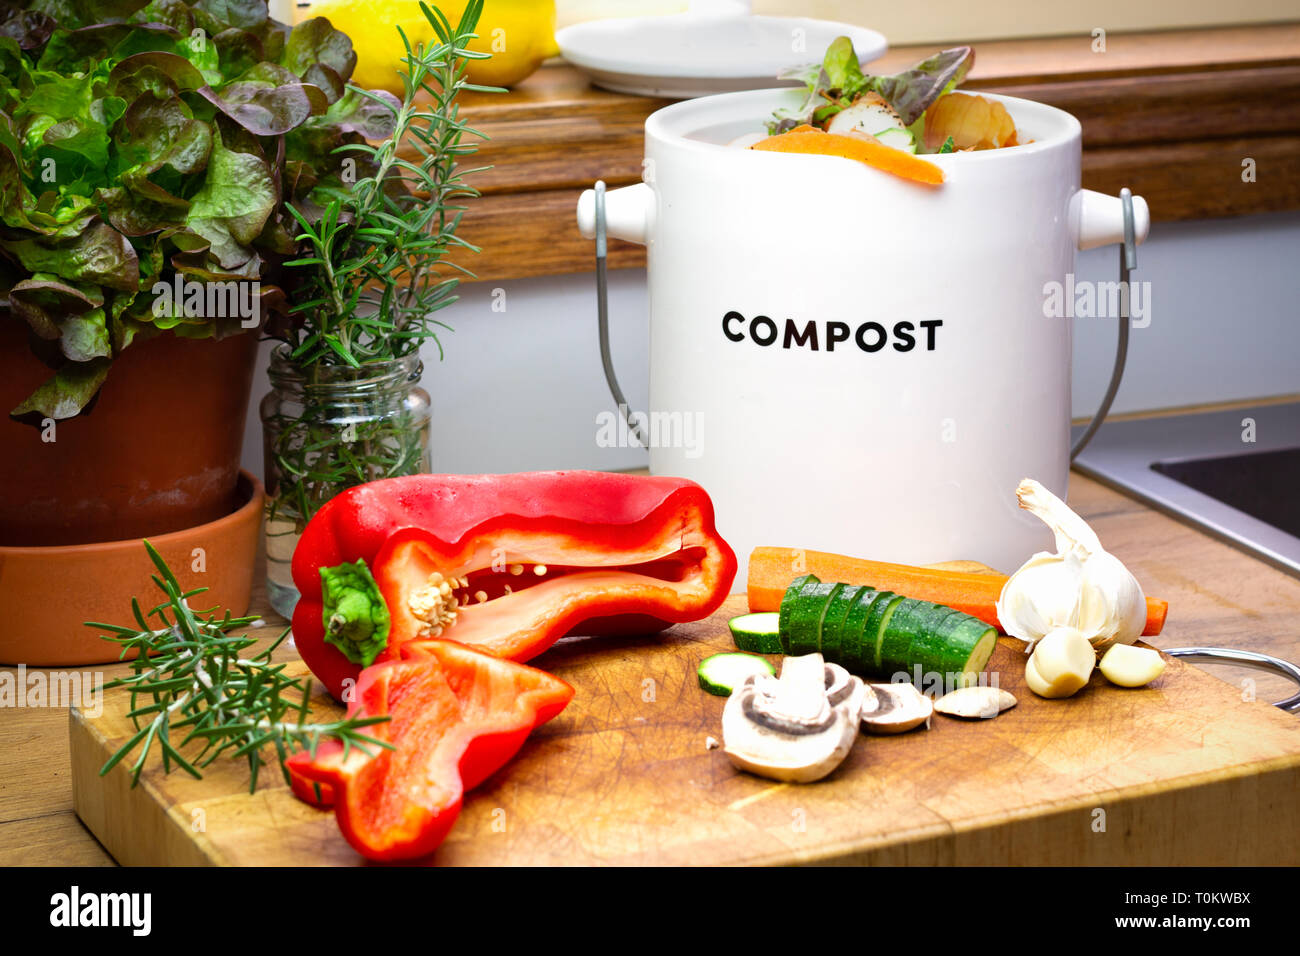 Food waste recycling kitchen, food waste from food preparation collected for recycling in kitchen compost collecting container with chopped vegetables Stock Photo